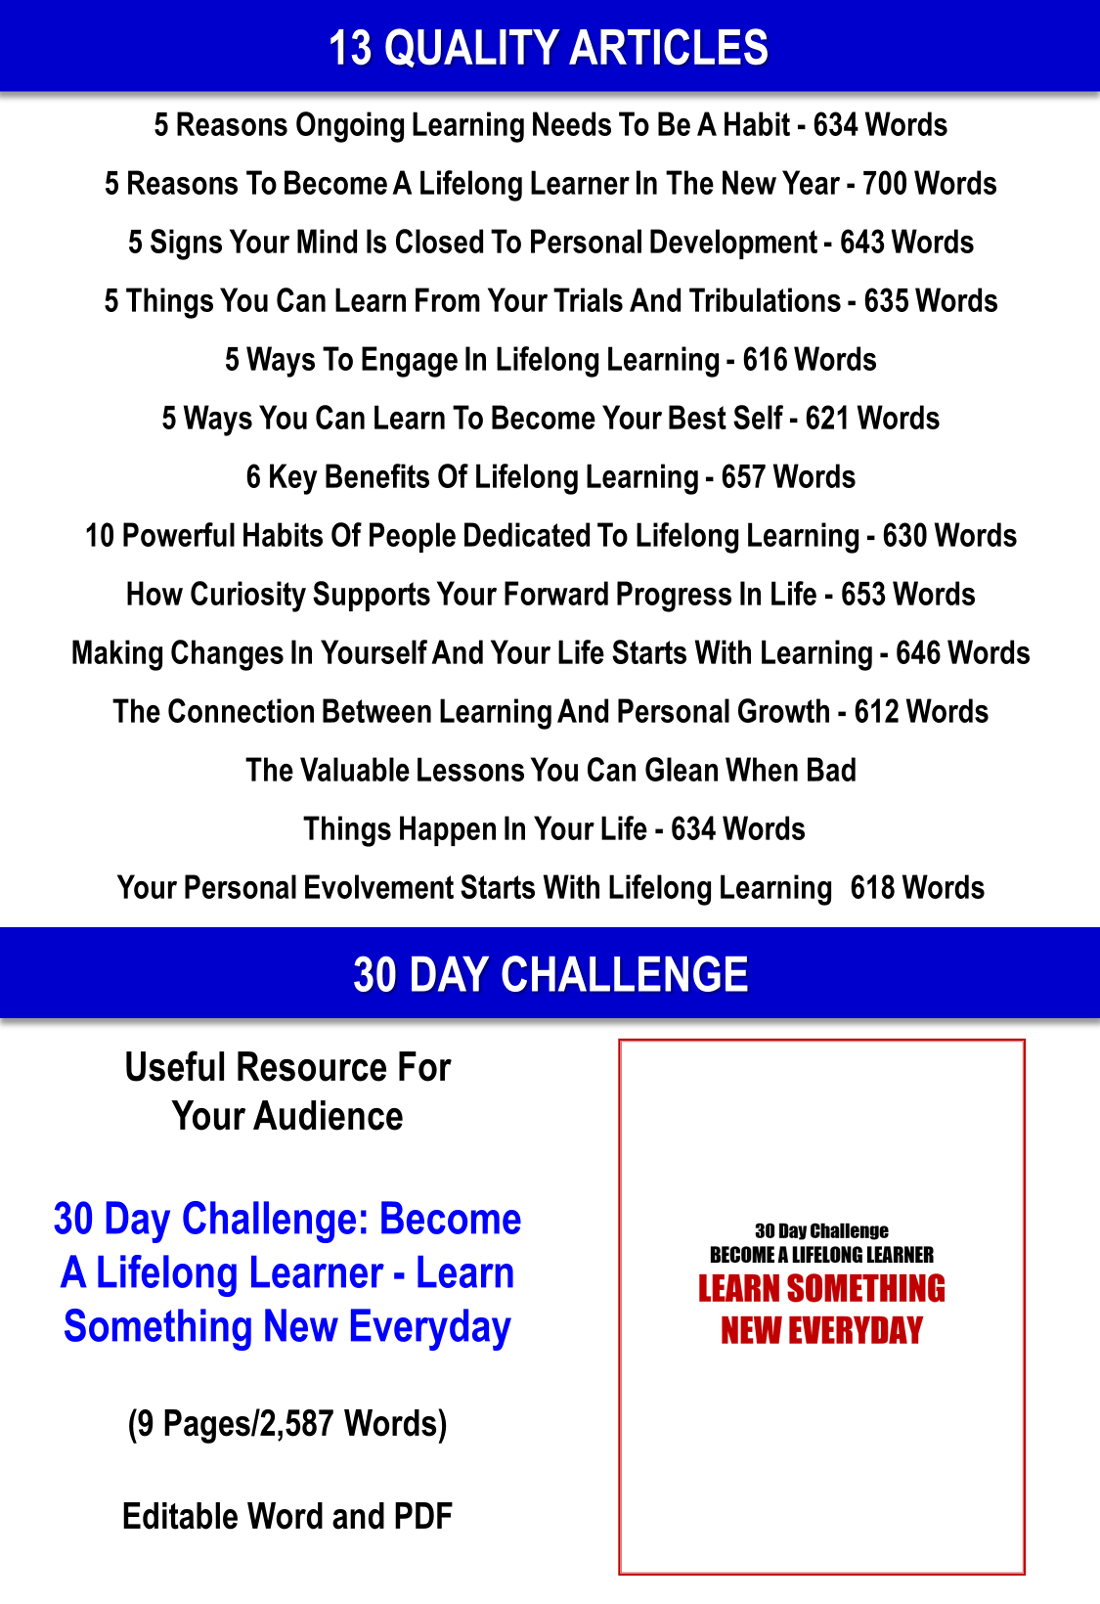 Learning For Life Articles + 30 Day Challenge Content With PLR Rights